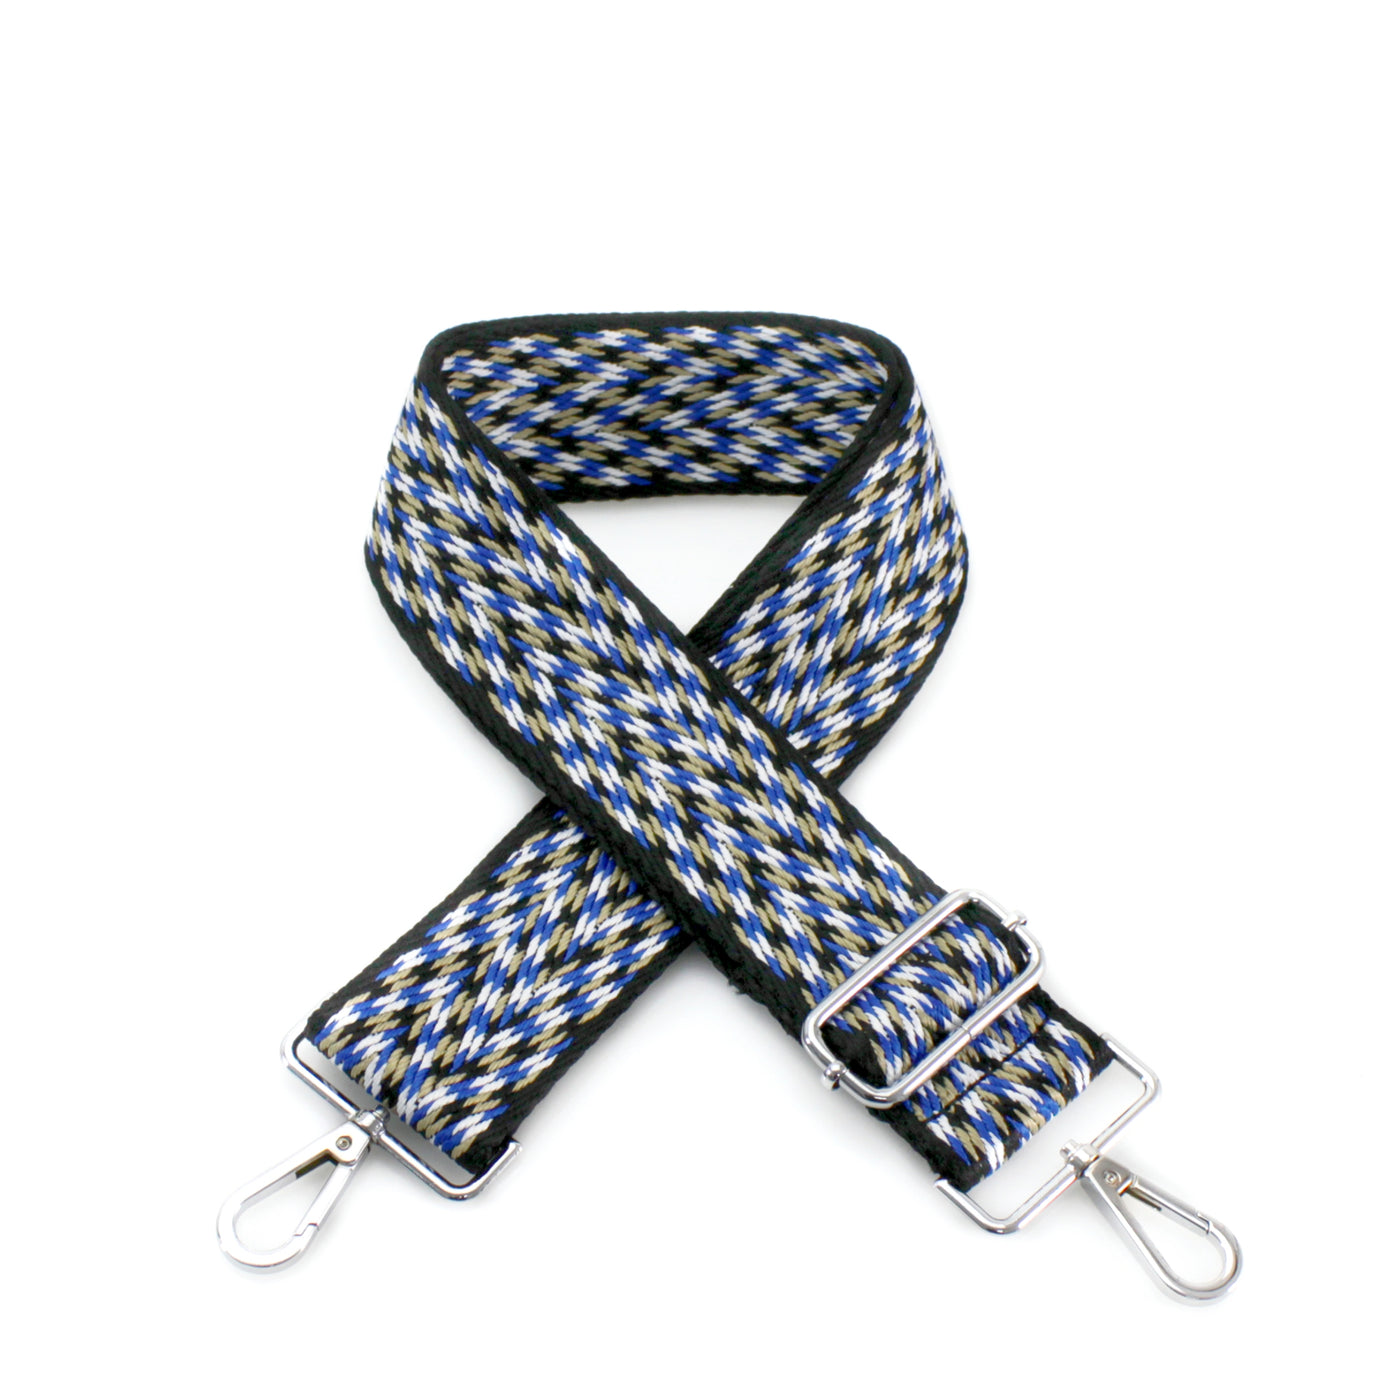 Black & Blue Textured Print Bag Strap - with Silver Fittings